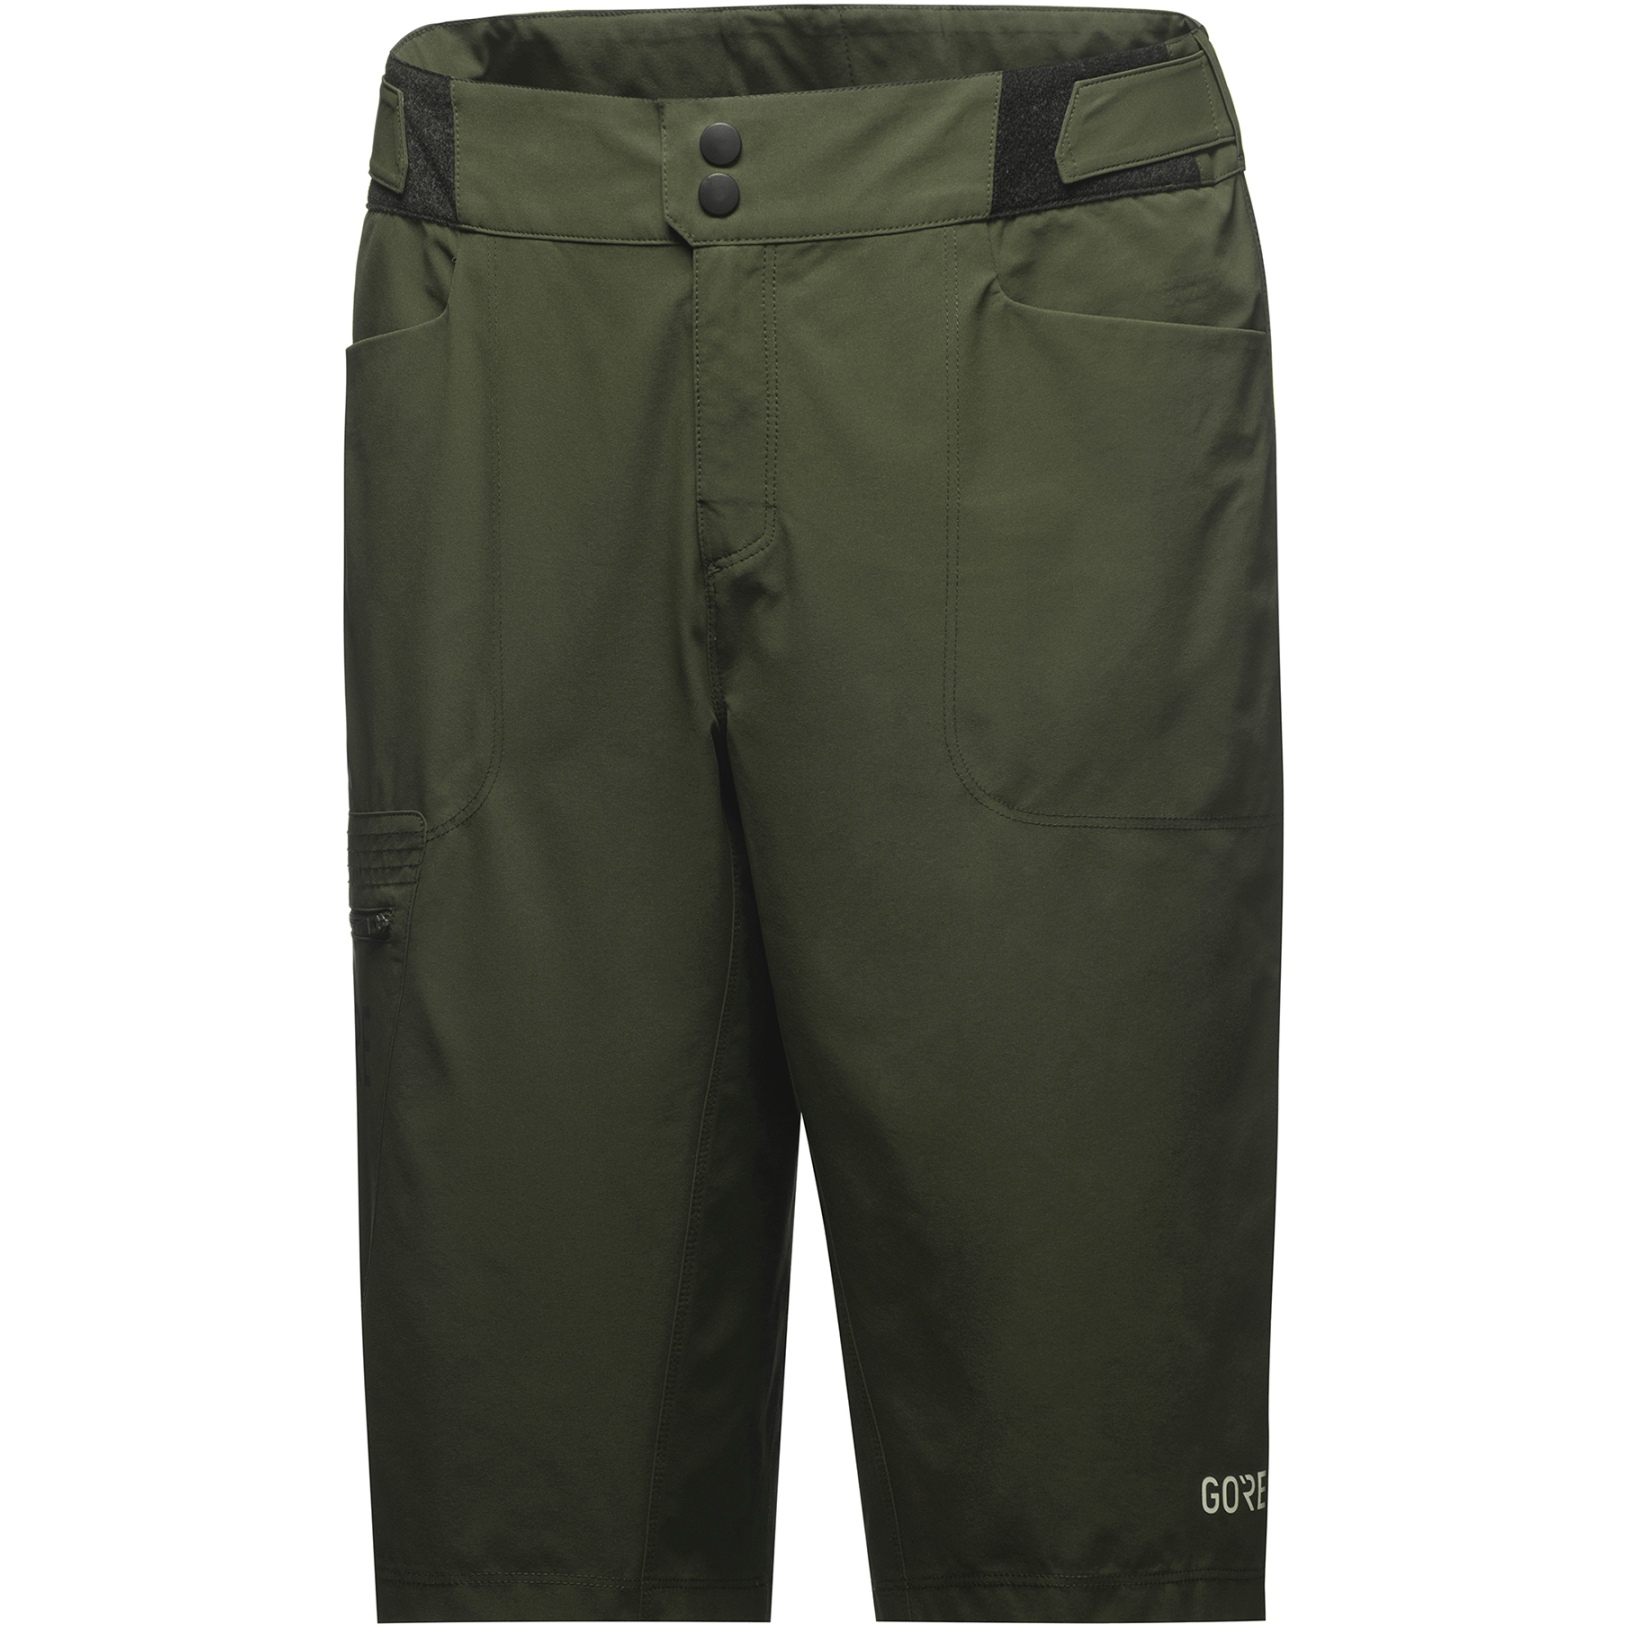 Picture of GOREWEAR Passion Shorts Men - utility green BH00